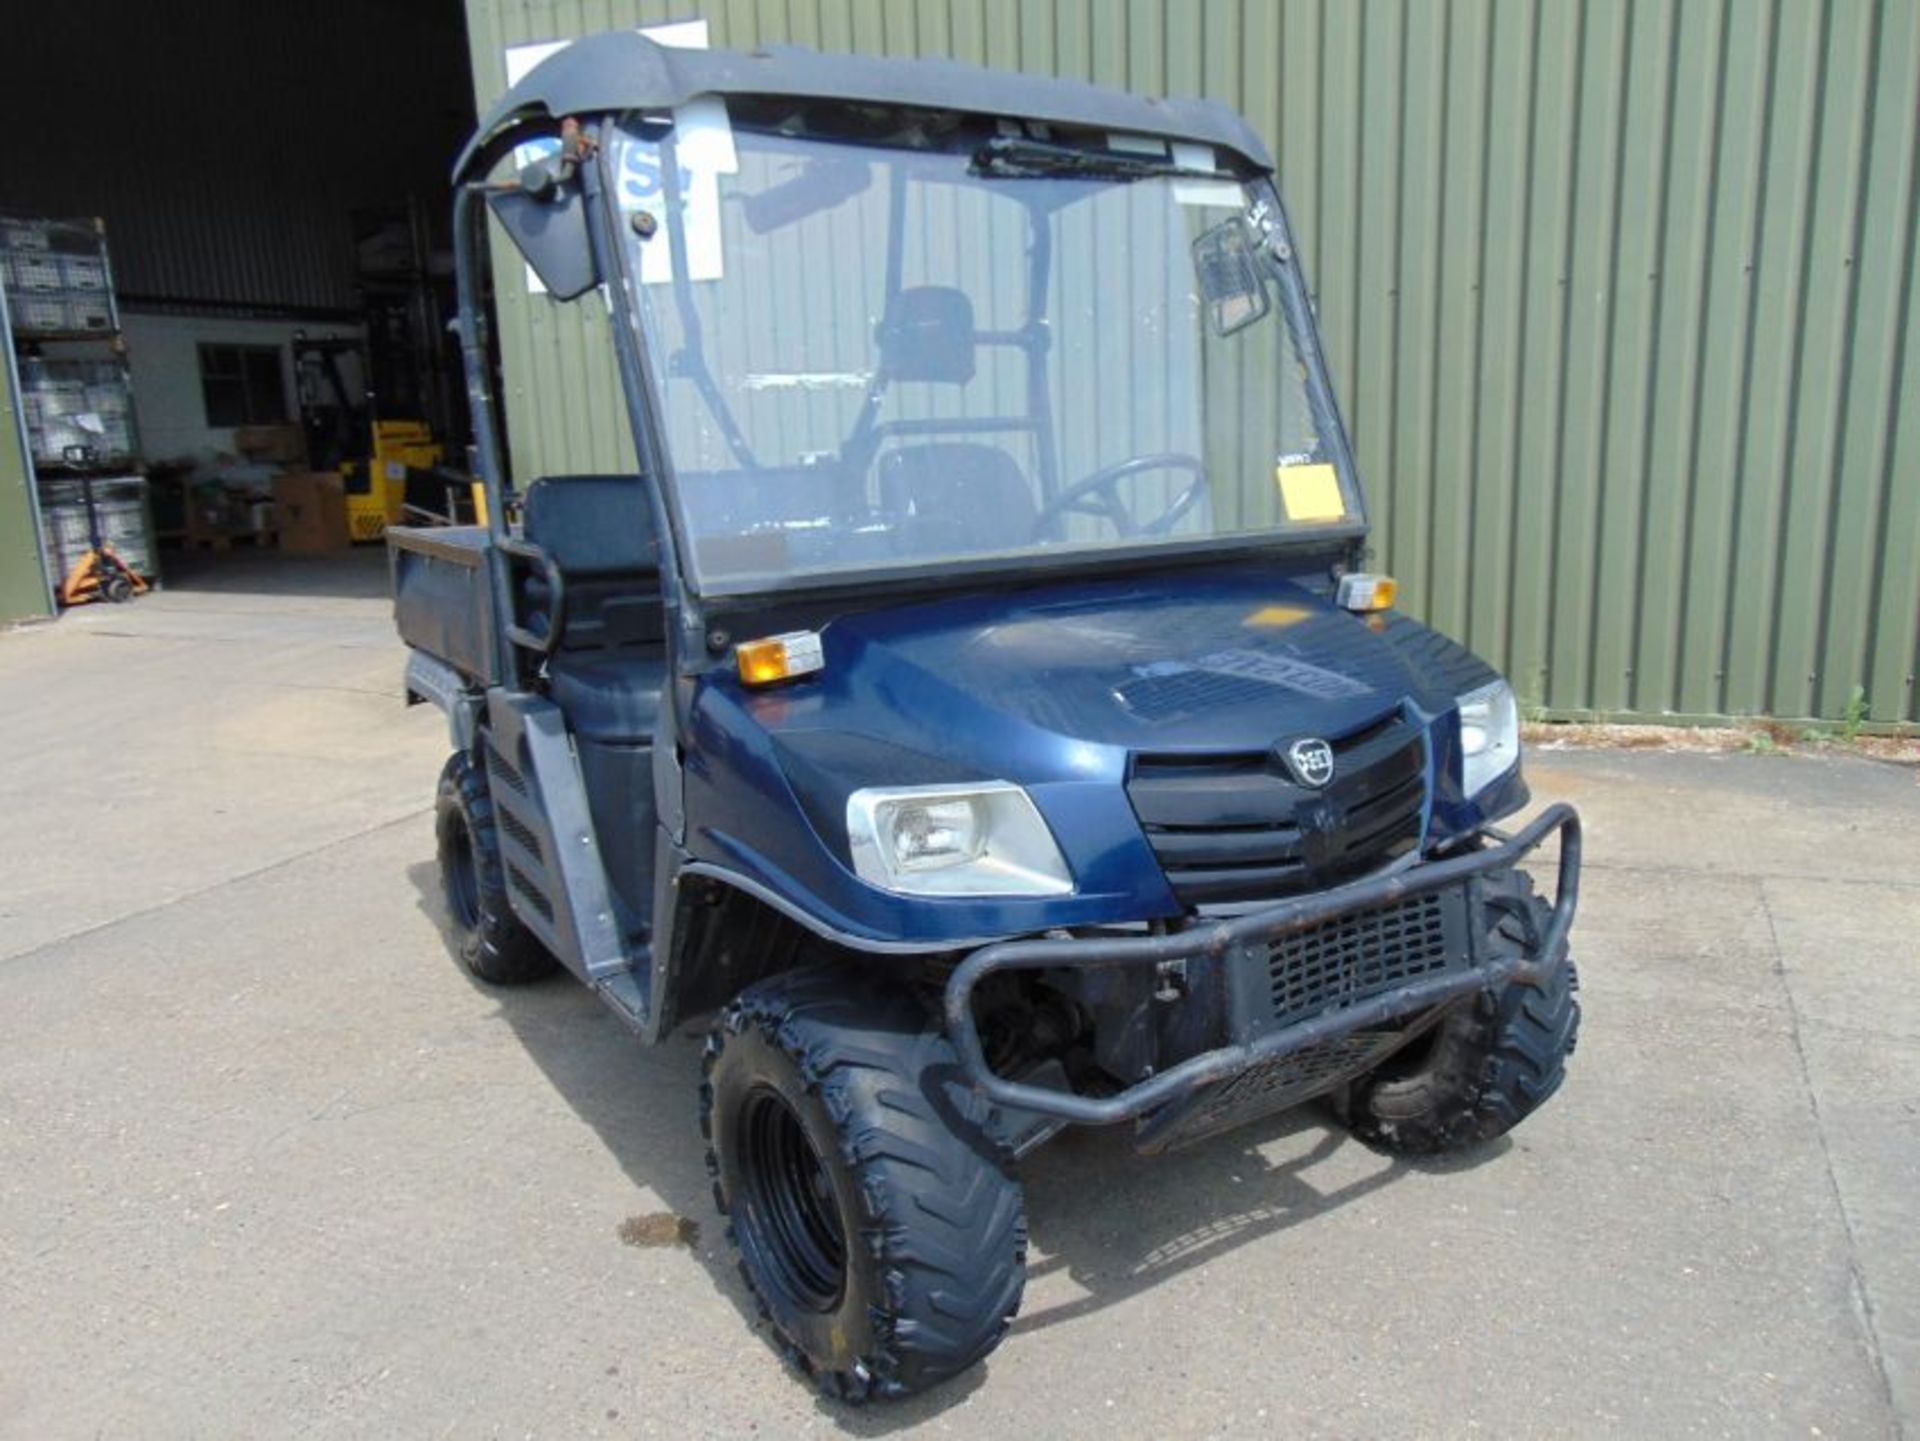 2014 Cushman XD1600 4x4 Diesel Utility Vehicle Showing 1333 hrs - Image 3 of 19